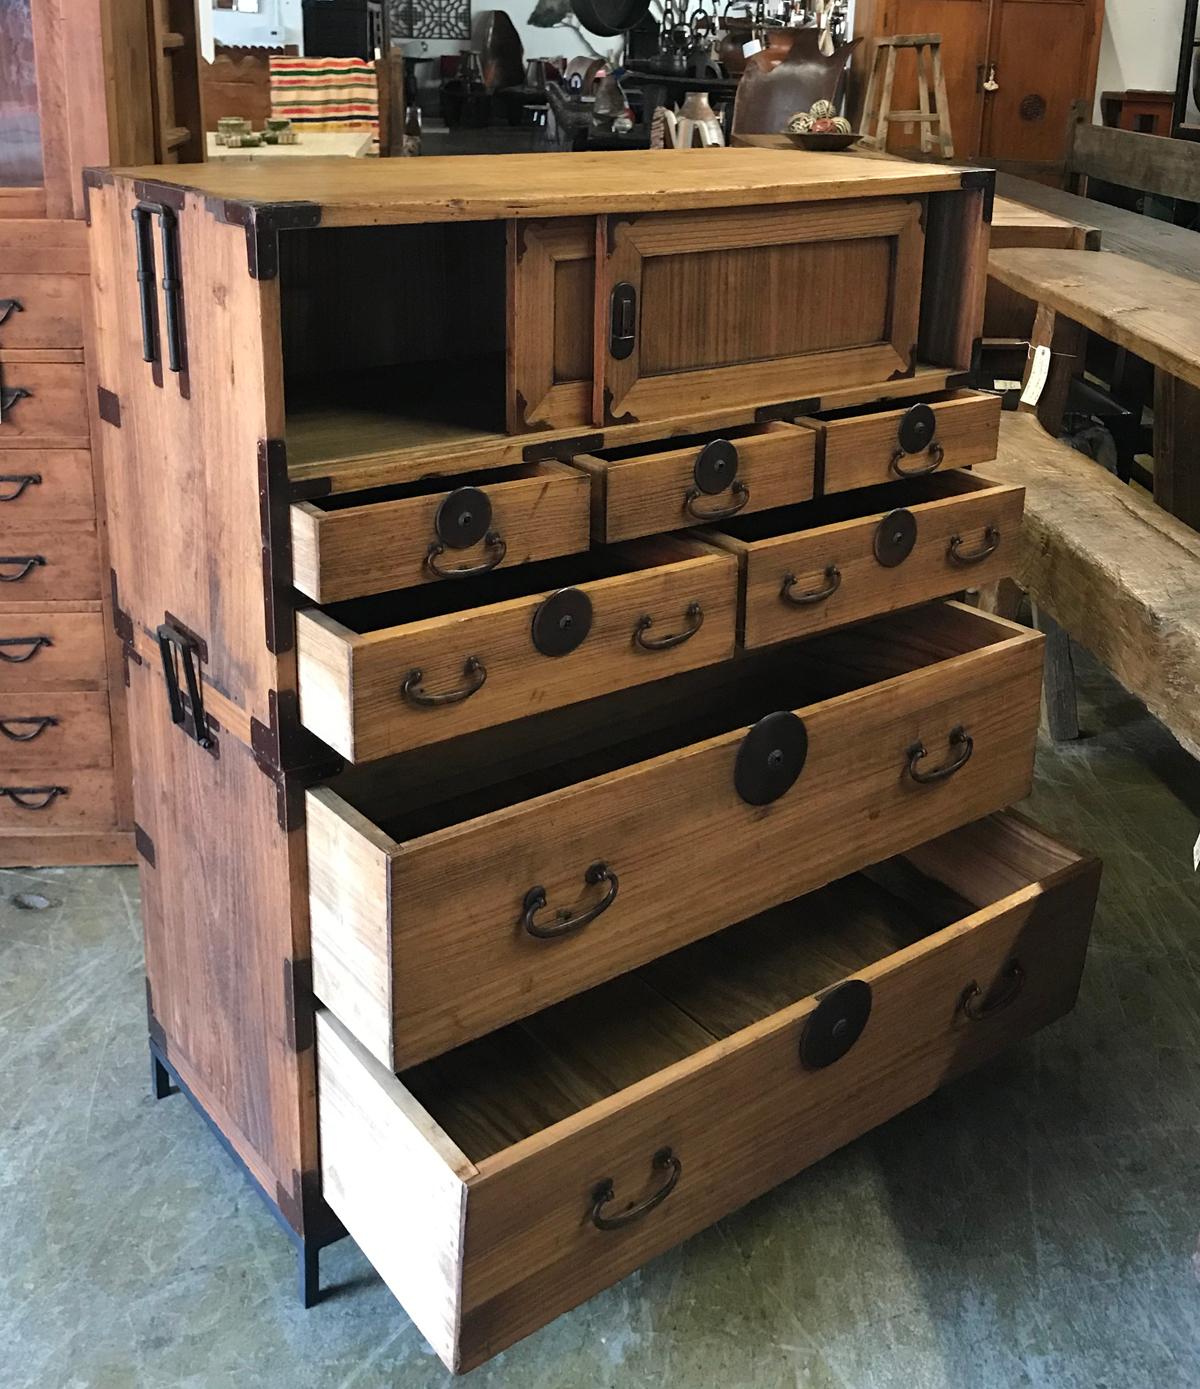 Japanese stacked tansu on custom made metal stands. Bottom pieces has two drawers and the top has a pair of sliding doors and five smaller drawers. In excellent condition and abundance of storage. Medium light color with smooth patina. Sturdy and